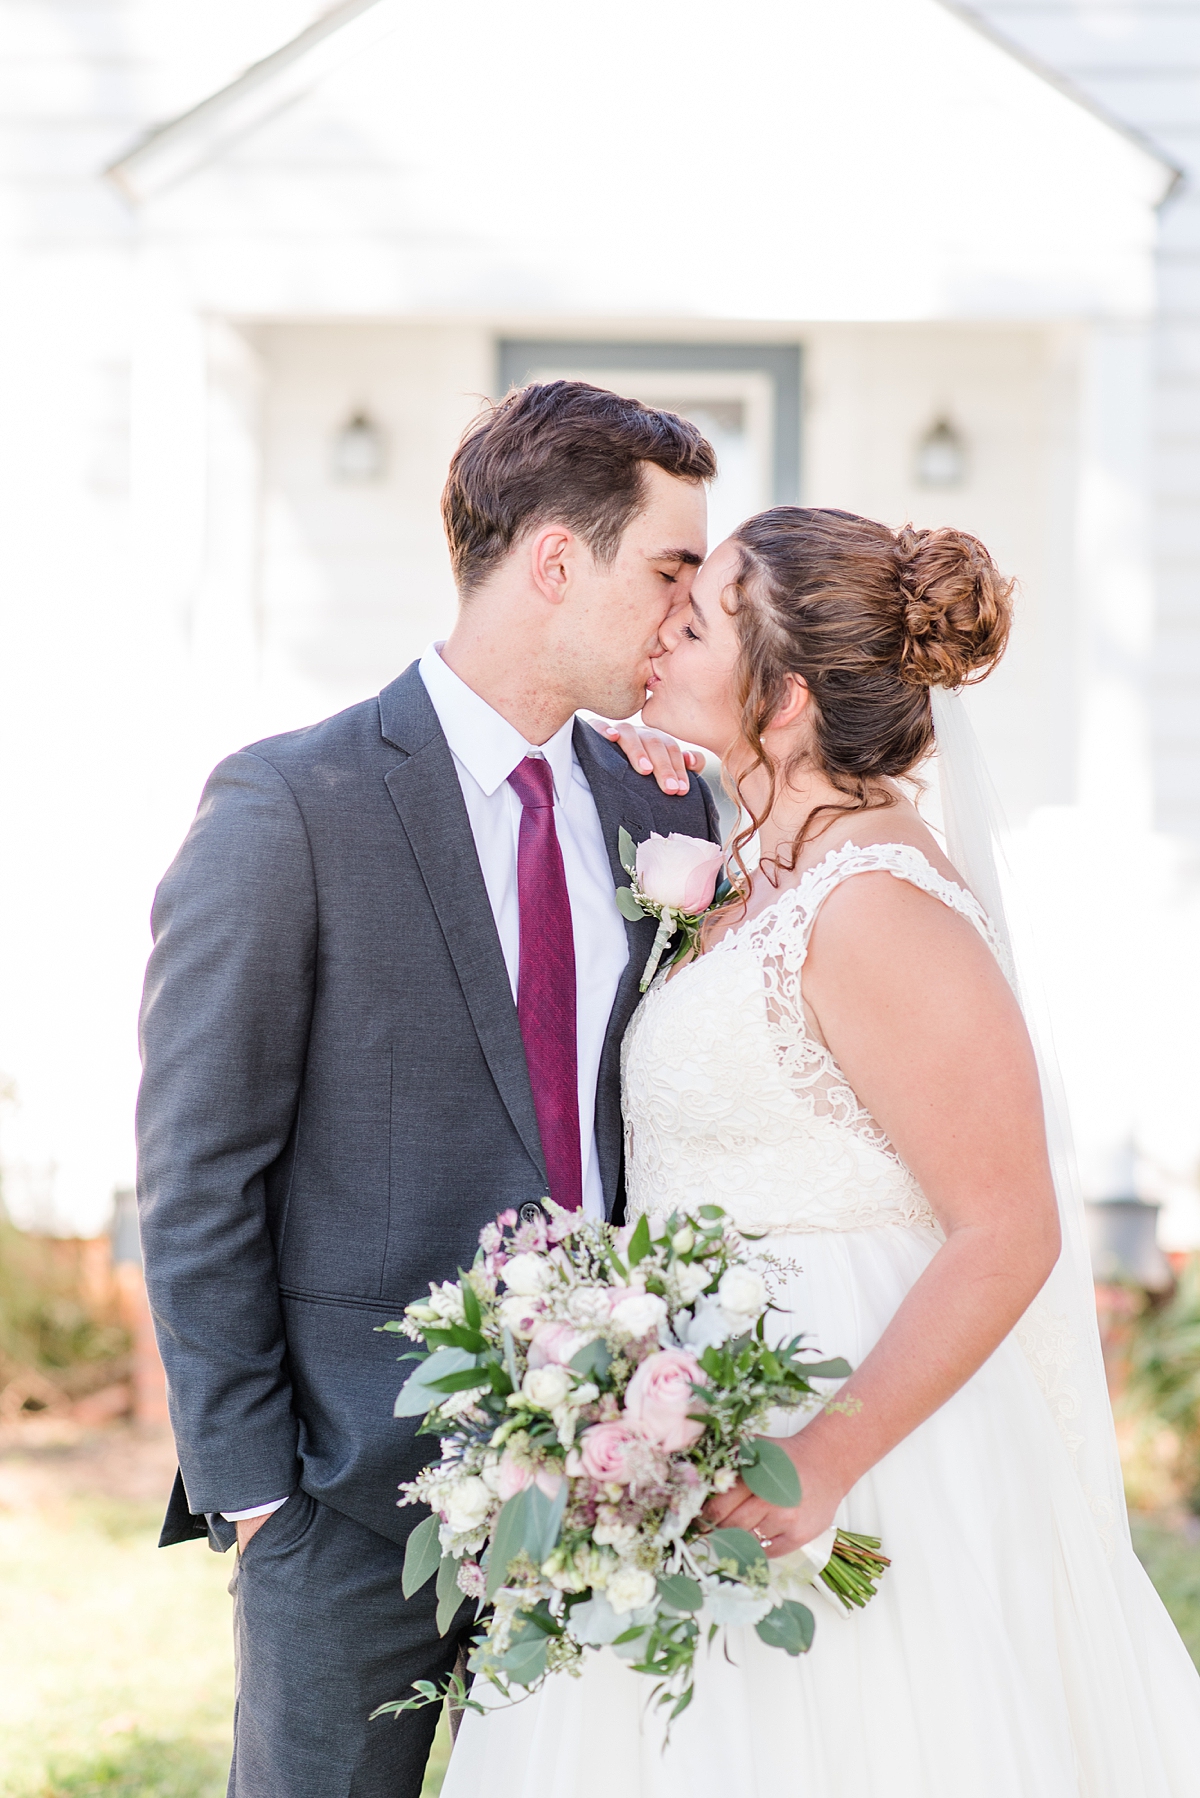 First Look Portraits on with Veil at Lake Front Fall Wedding. Wedding Photography by Richmond Wedding Photographer Kailey Brianne Photography. 